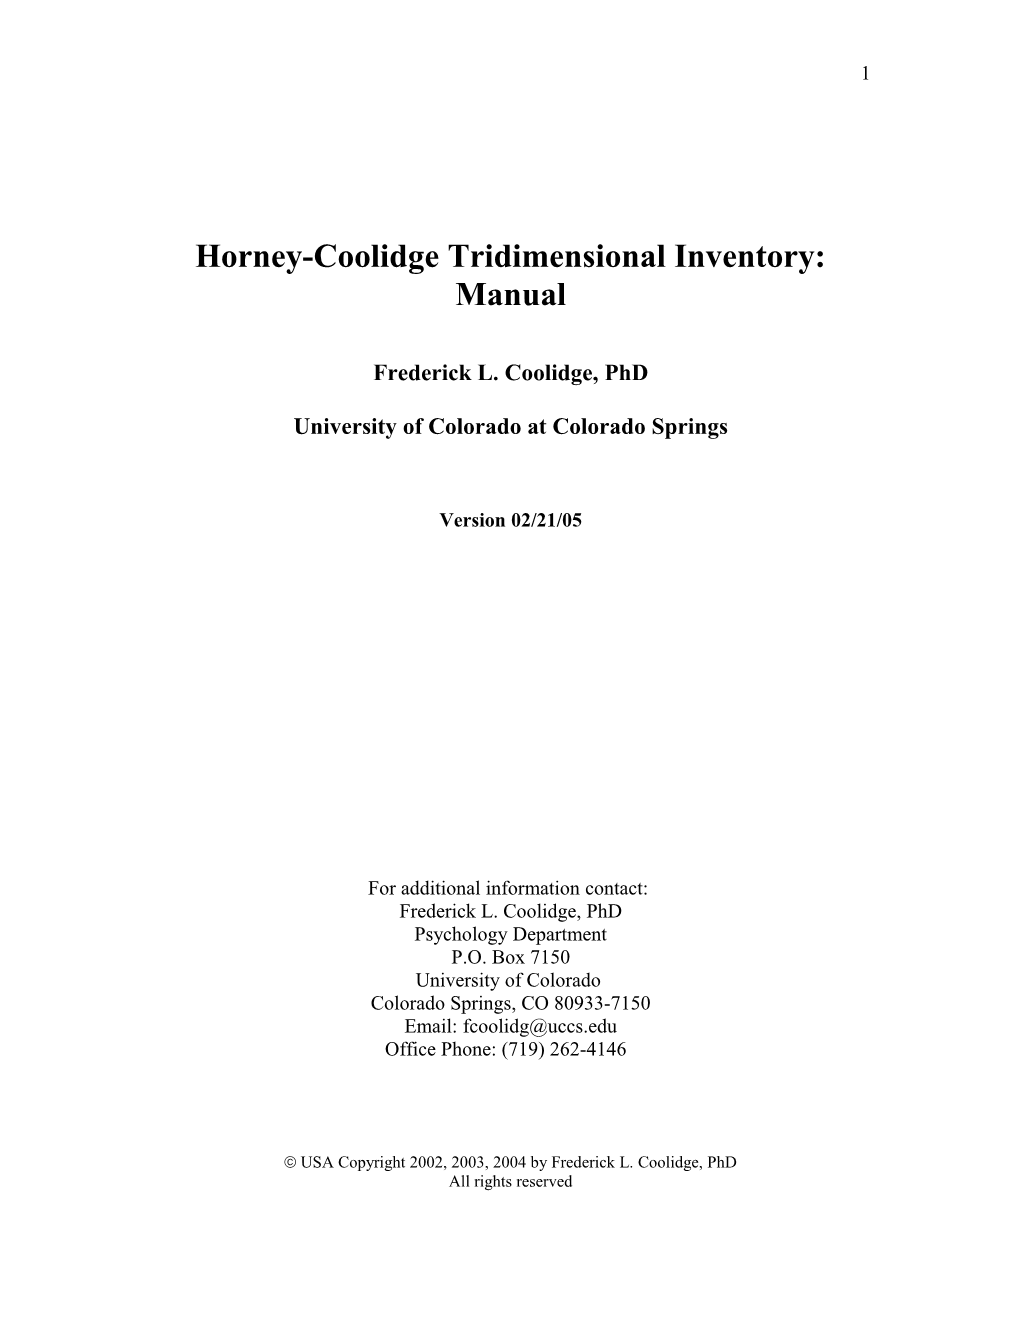 Horney-Coolidge Tridimensional Inventory: Manual